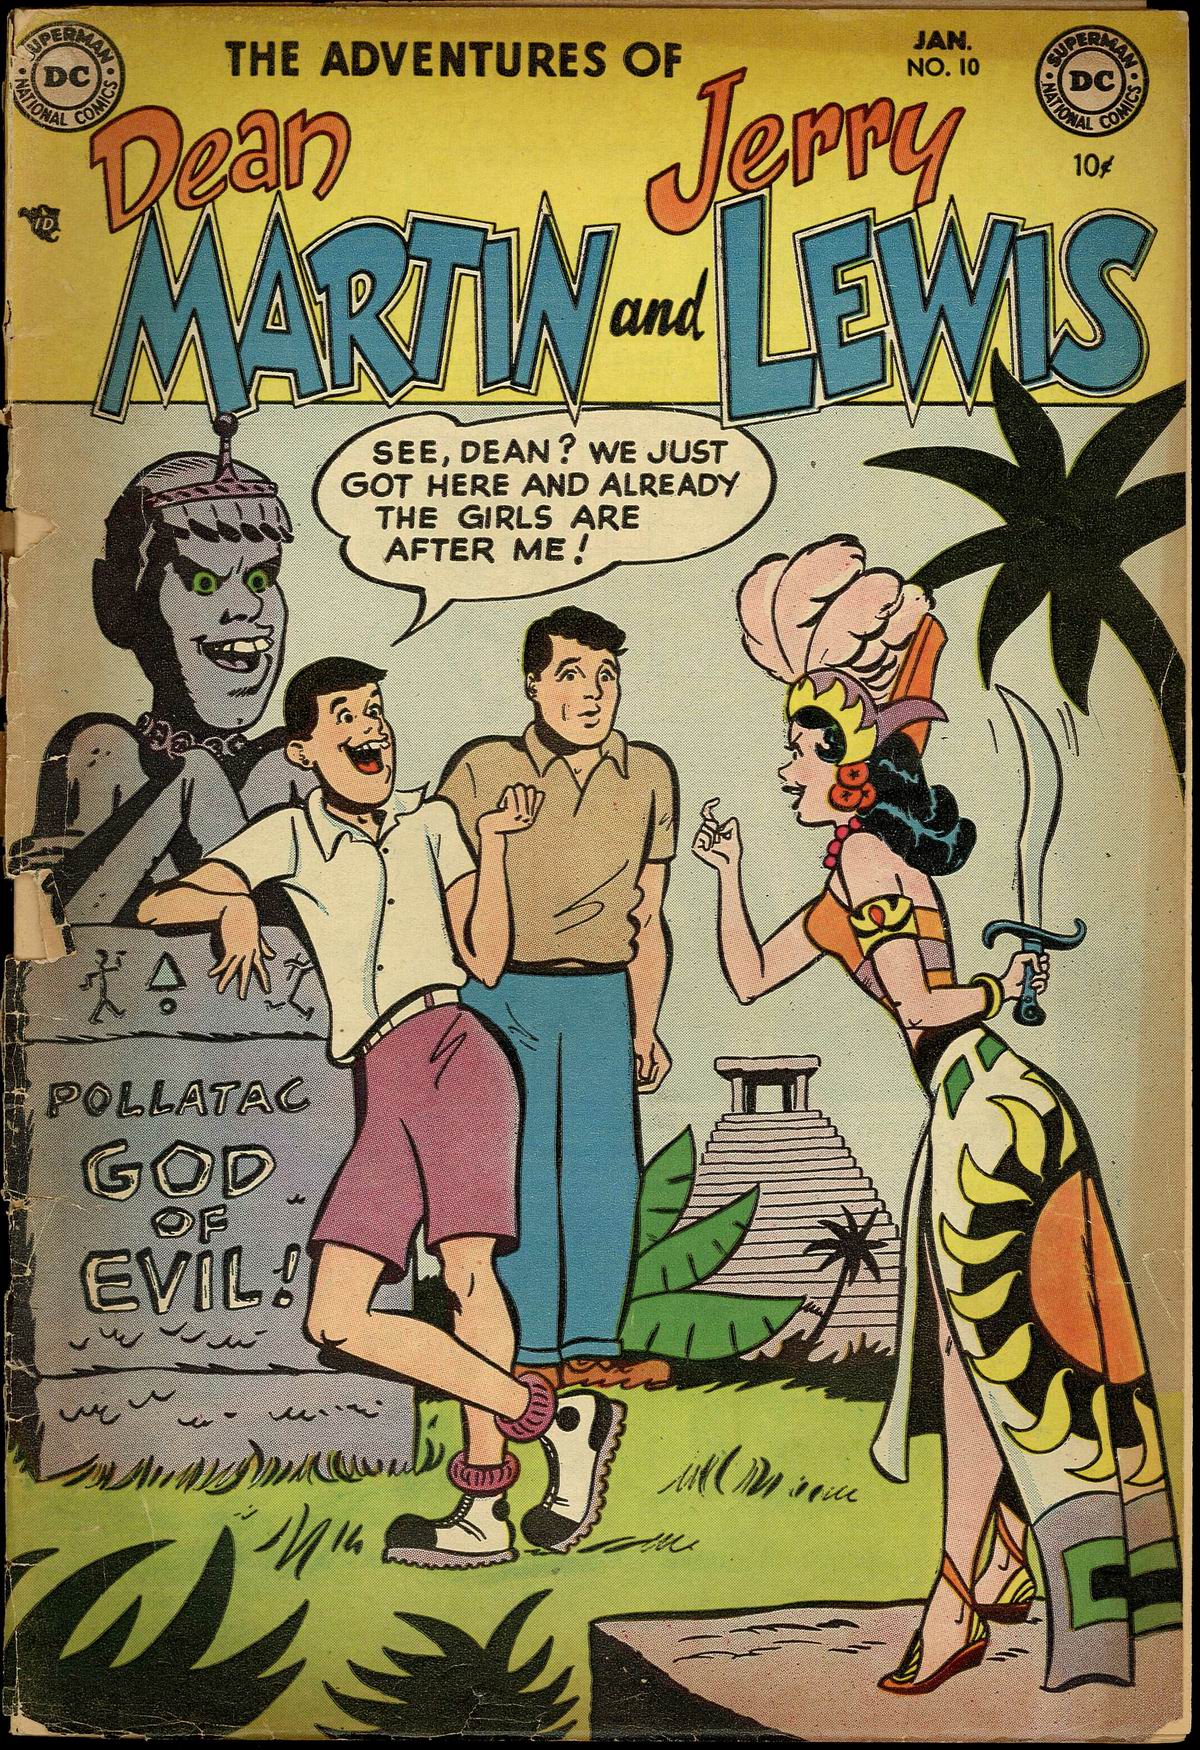 Read online The Adventures of Dean Martin and Jerry Lewis comic -  Issue #10 - 1